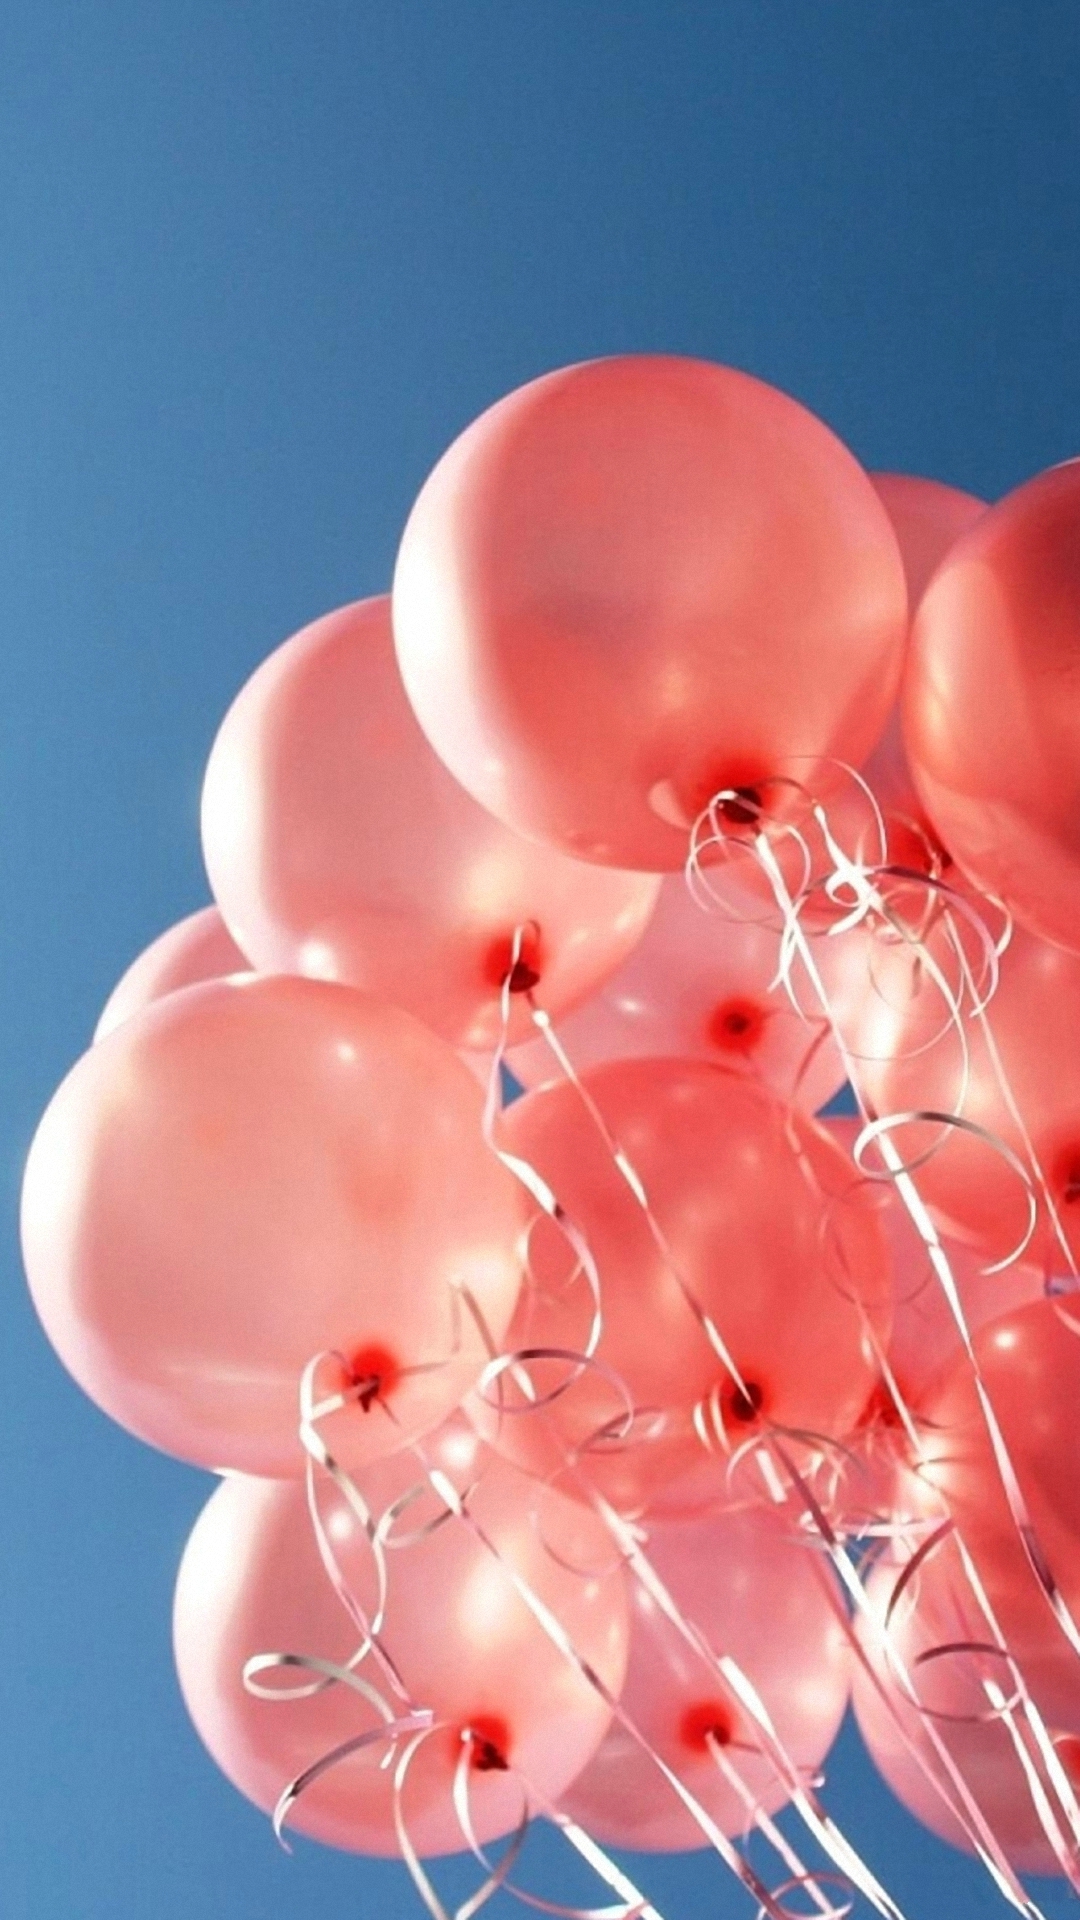 Cool Pink Balloons Iphone Background.